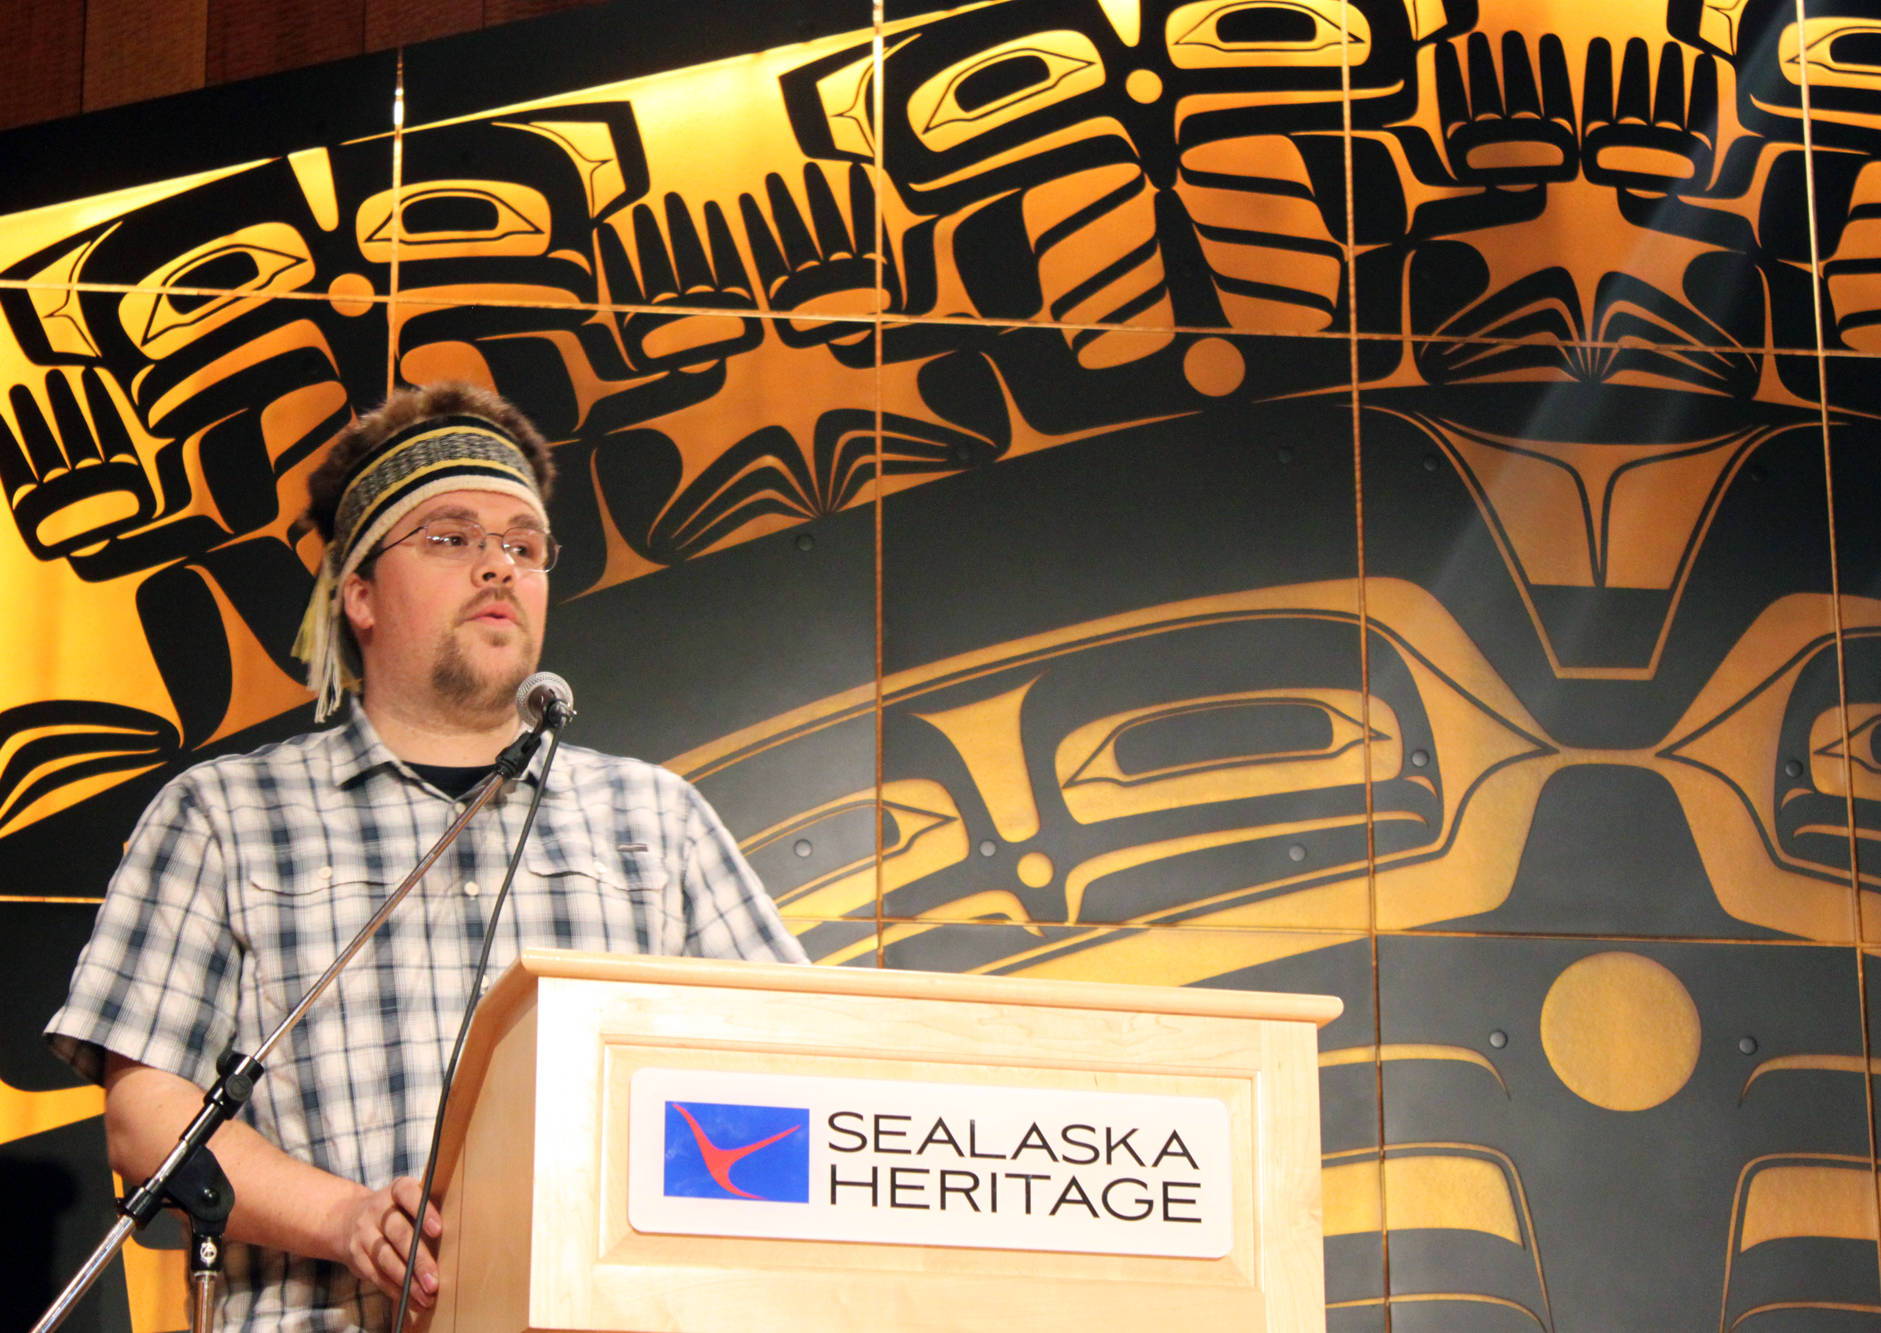 In this June 2016 photo, David R. Boxley gives an acceptance speech for winning “Best of Show” in the Northwest Coast Juried Art Show during the awards ceremony in the Walter Soboleff Building’s clan house. (Lisa Phu | Juneau Empire File)